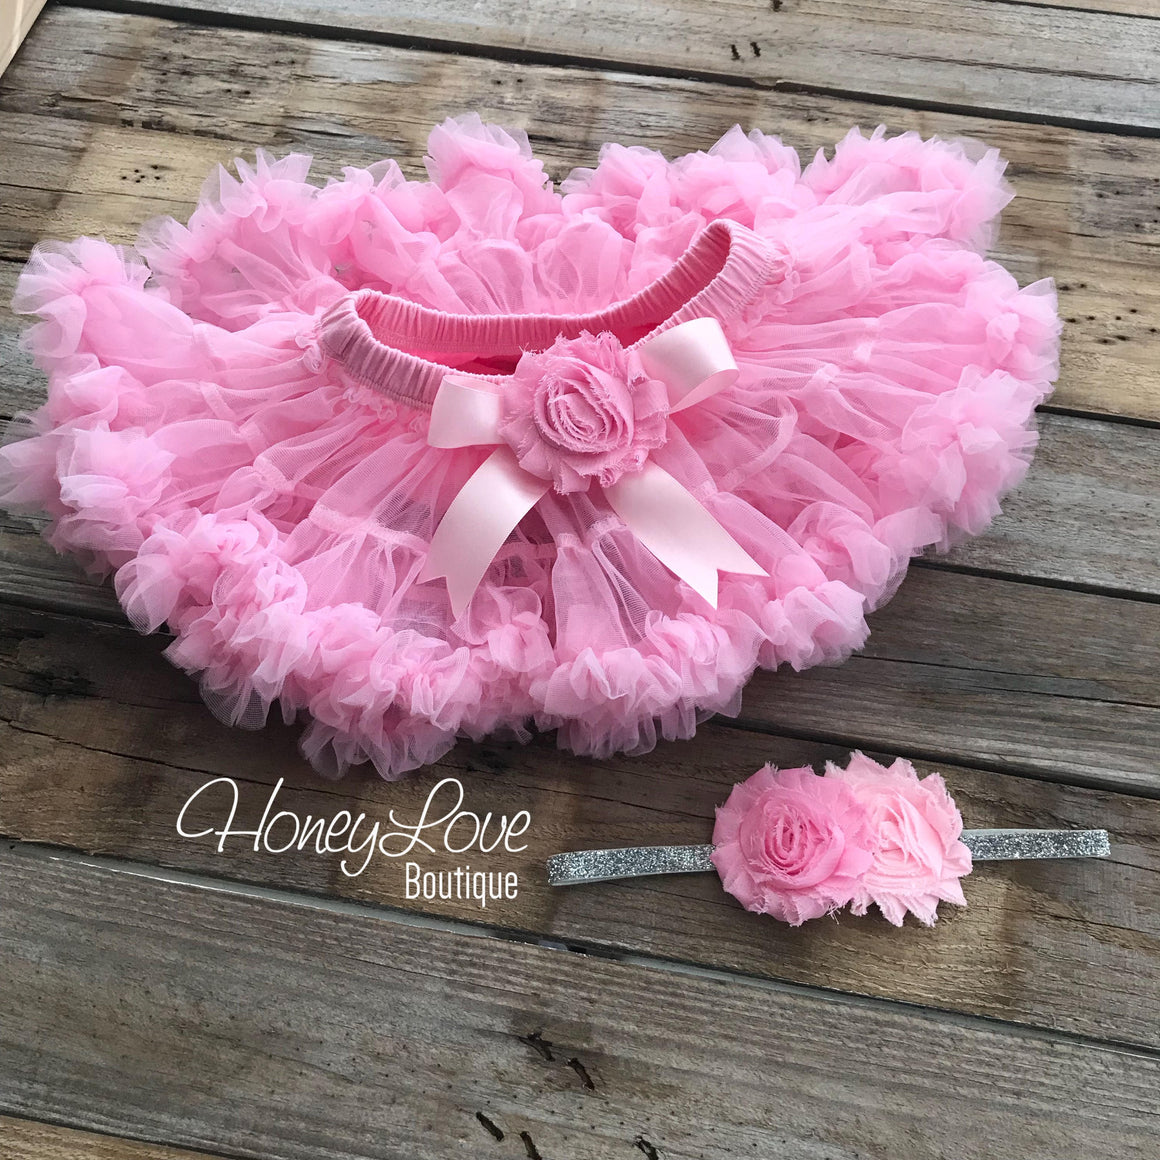 Personalized 1st Birthday Princess outfit - Silver Glitter and Light Pink - embellished pettiskirt - HoneyLoveBoutique